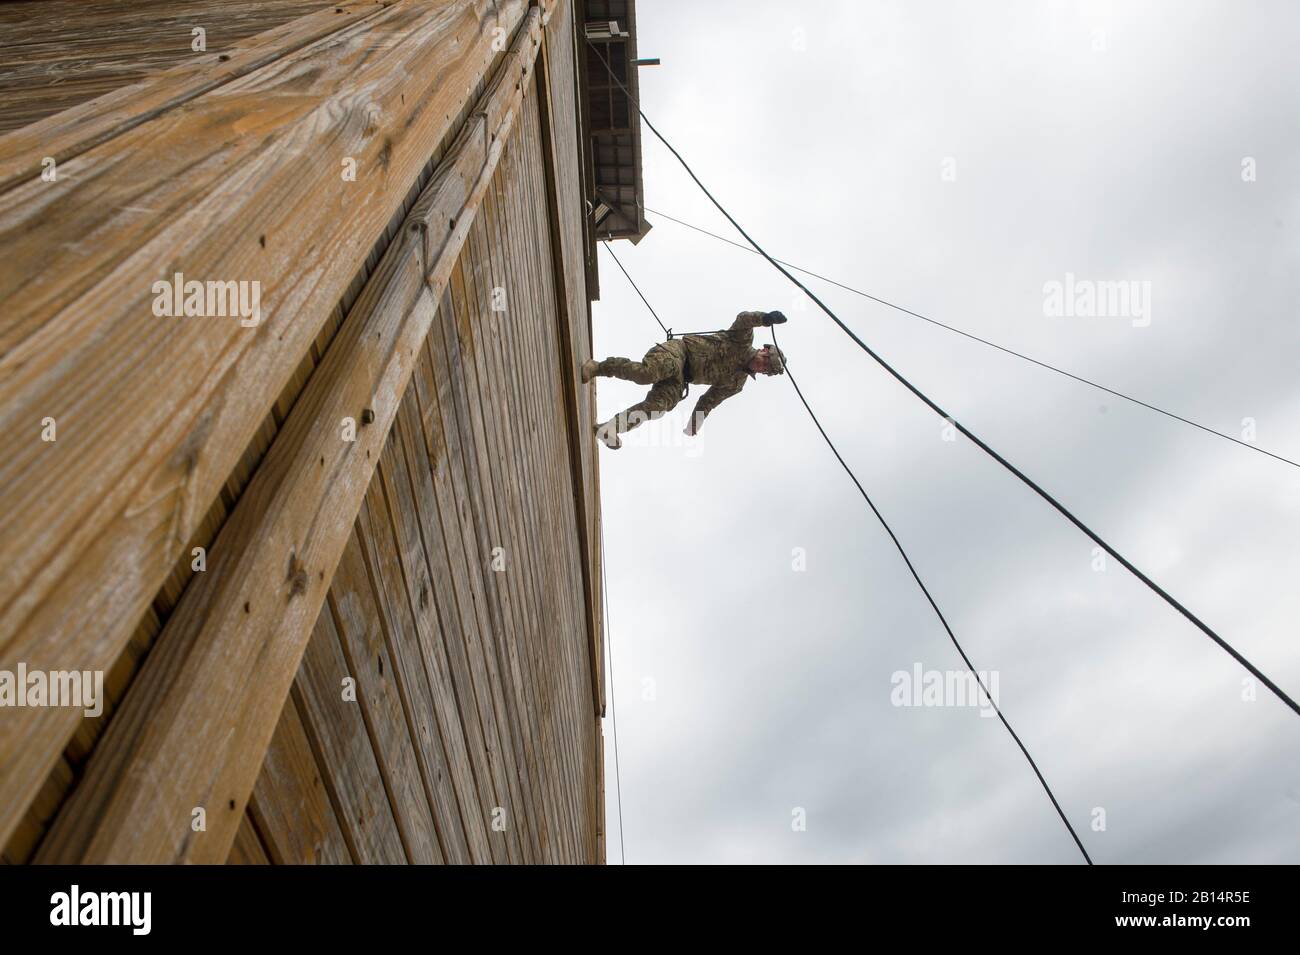 A U.S. Navy explosive ordnance disposal technician assigned to Explosive Ordnance Disposal Group (EODGRU) 2 conducts an “Australian” rappel during helicopter rope suspension technique (HRST) training at Joint Expeditionary Base Little Creek-Fort Story, Va., March 19, 2018. EODGRU 2 is headquartered at Joint Expeditionary Base Little Creek-Fort Story and oversees Mobile Diving and Salvage Unit (MDSU) 2 and all east coast based EOD mobile Units. (U.S. Navy photo by Mass Communication Specialist 1st Class Jeff Atherton) Stock Photo